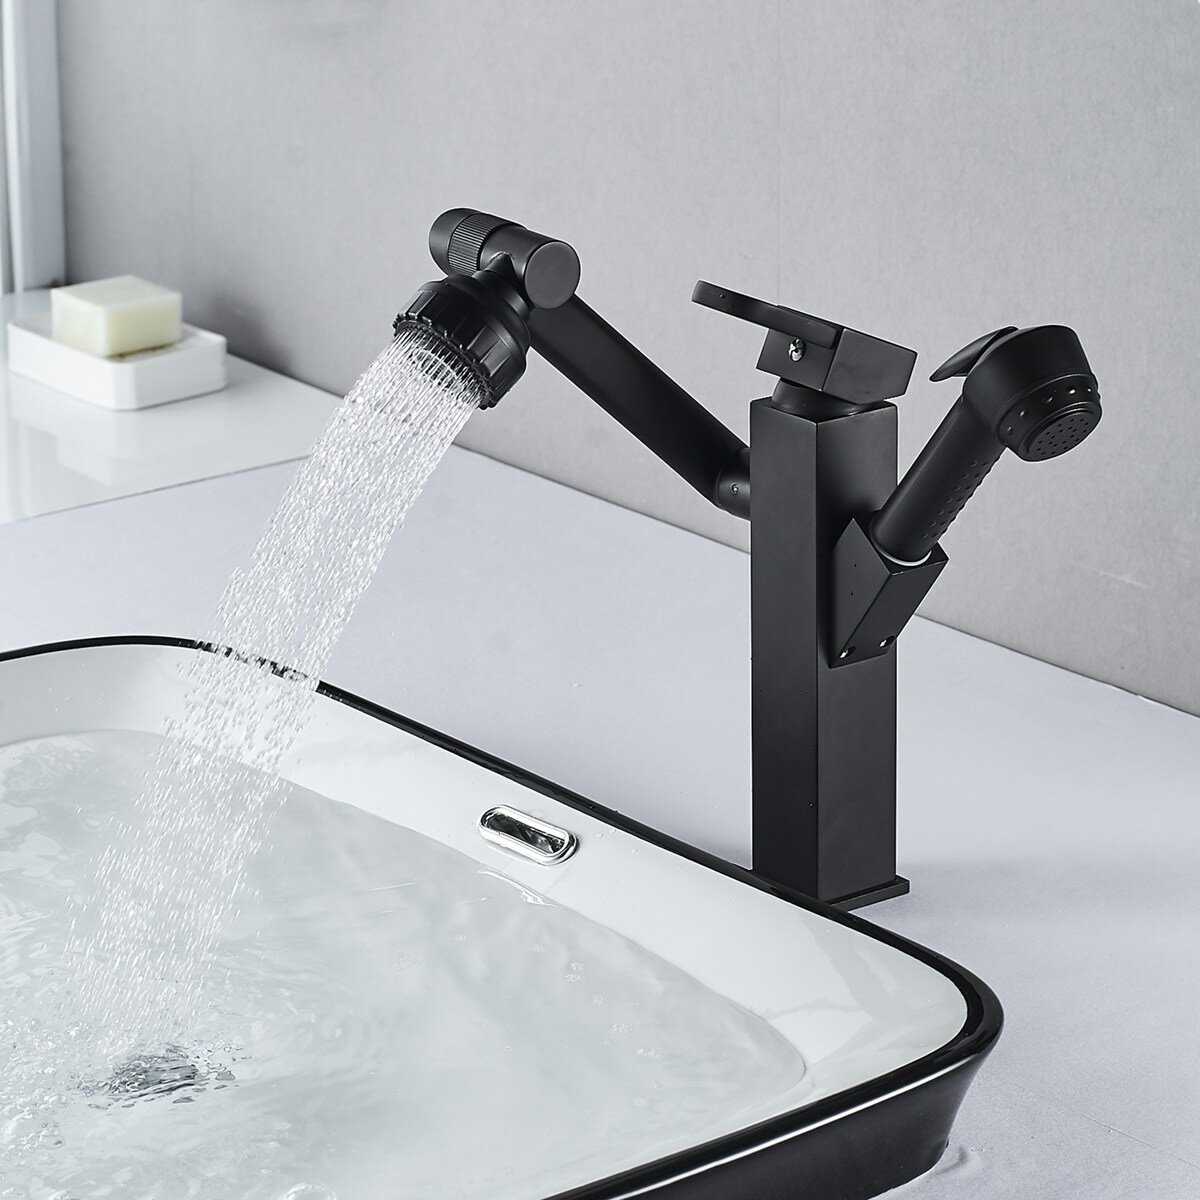 Bathroom Faucet Pull-Out Sink Faucet Adjustable and Rotatable Faucet with Sprayer Two Flow Modes Mod